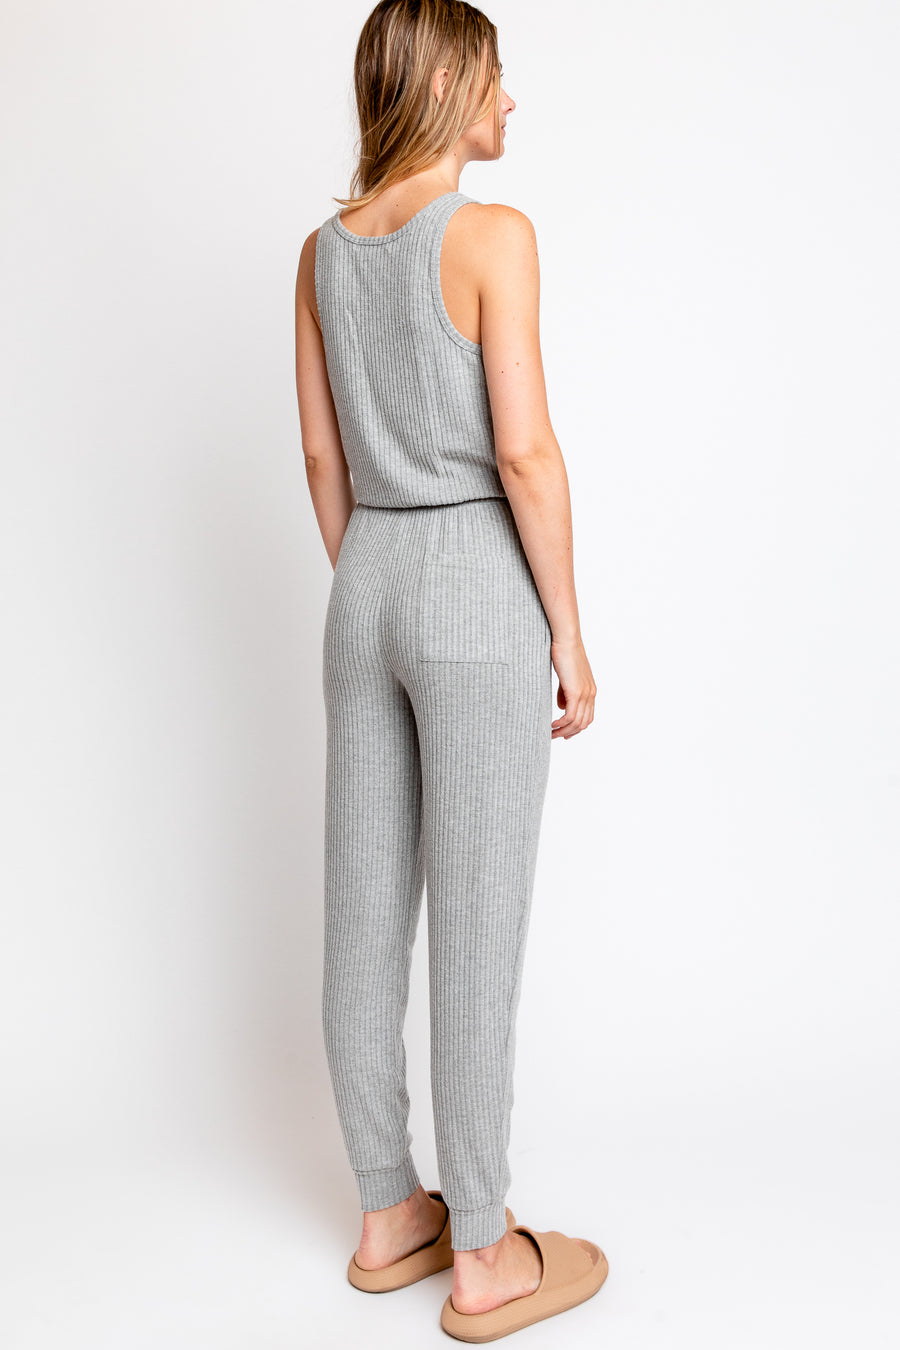 Spiritual Gangster Harmony Jogger Jumpsuit in Heather Grey